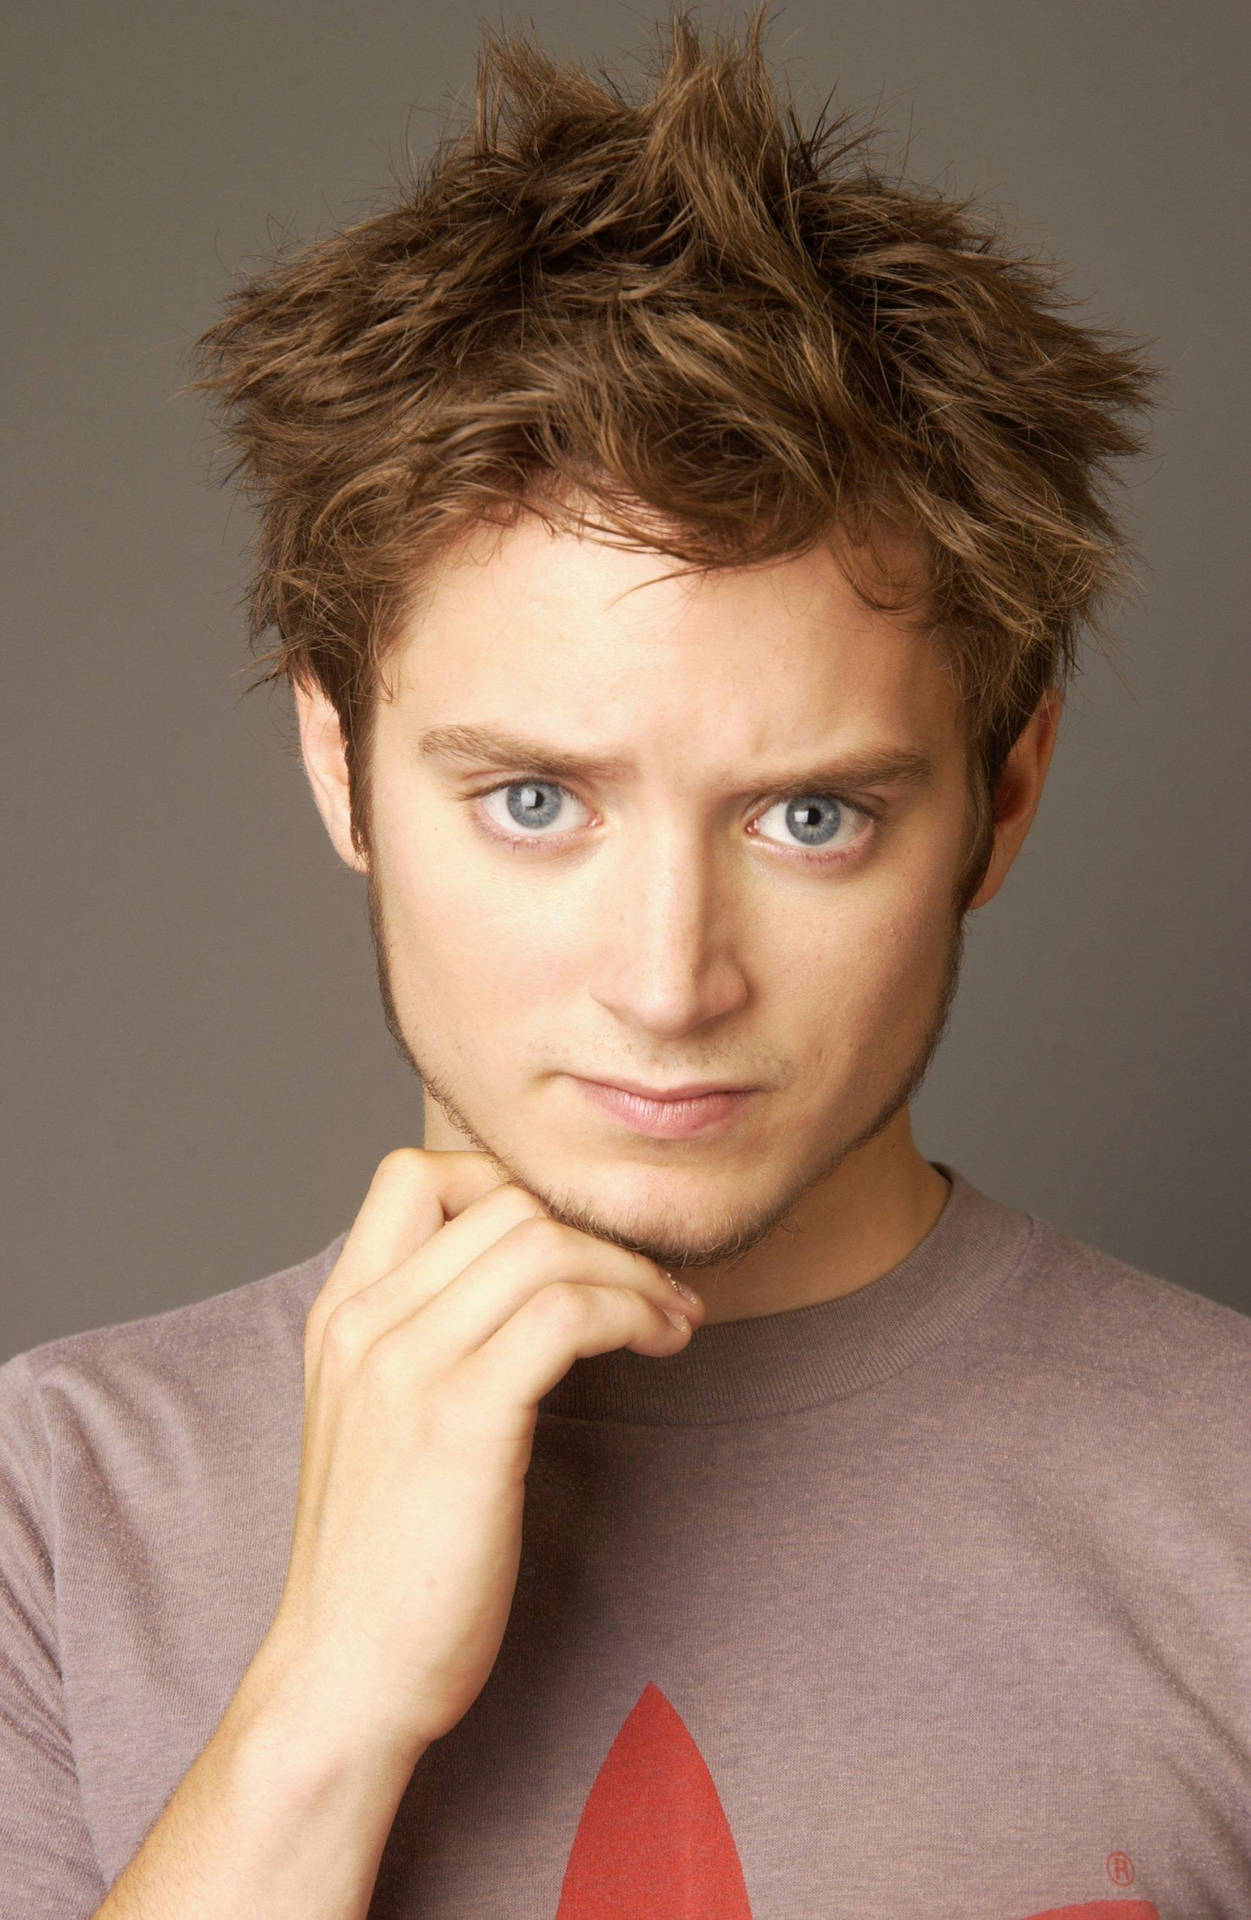 Elijah Wood With A Frizzy Brown Hair Background